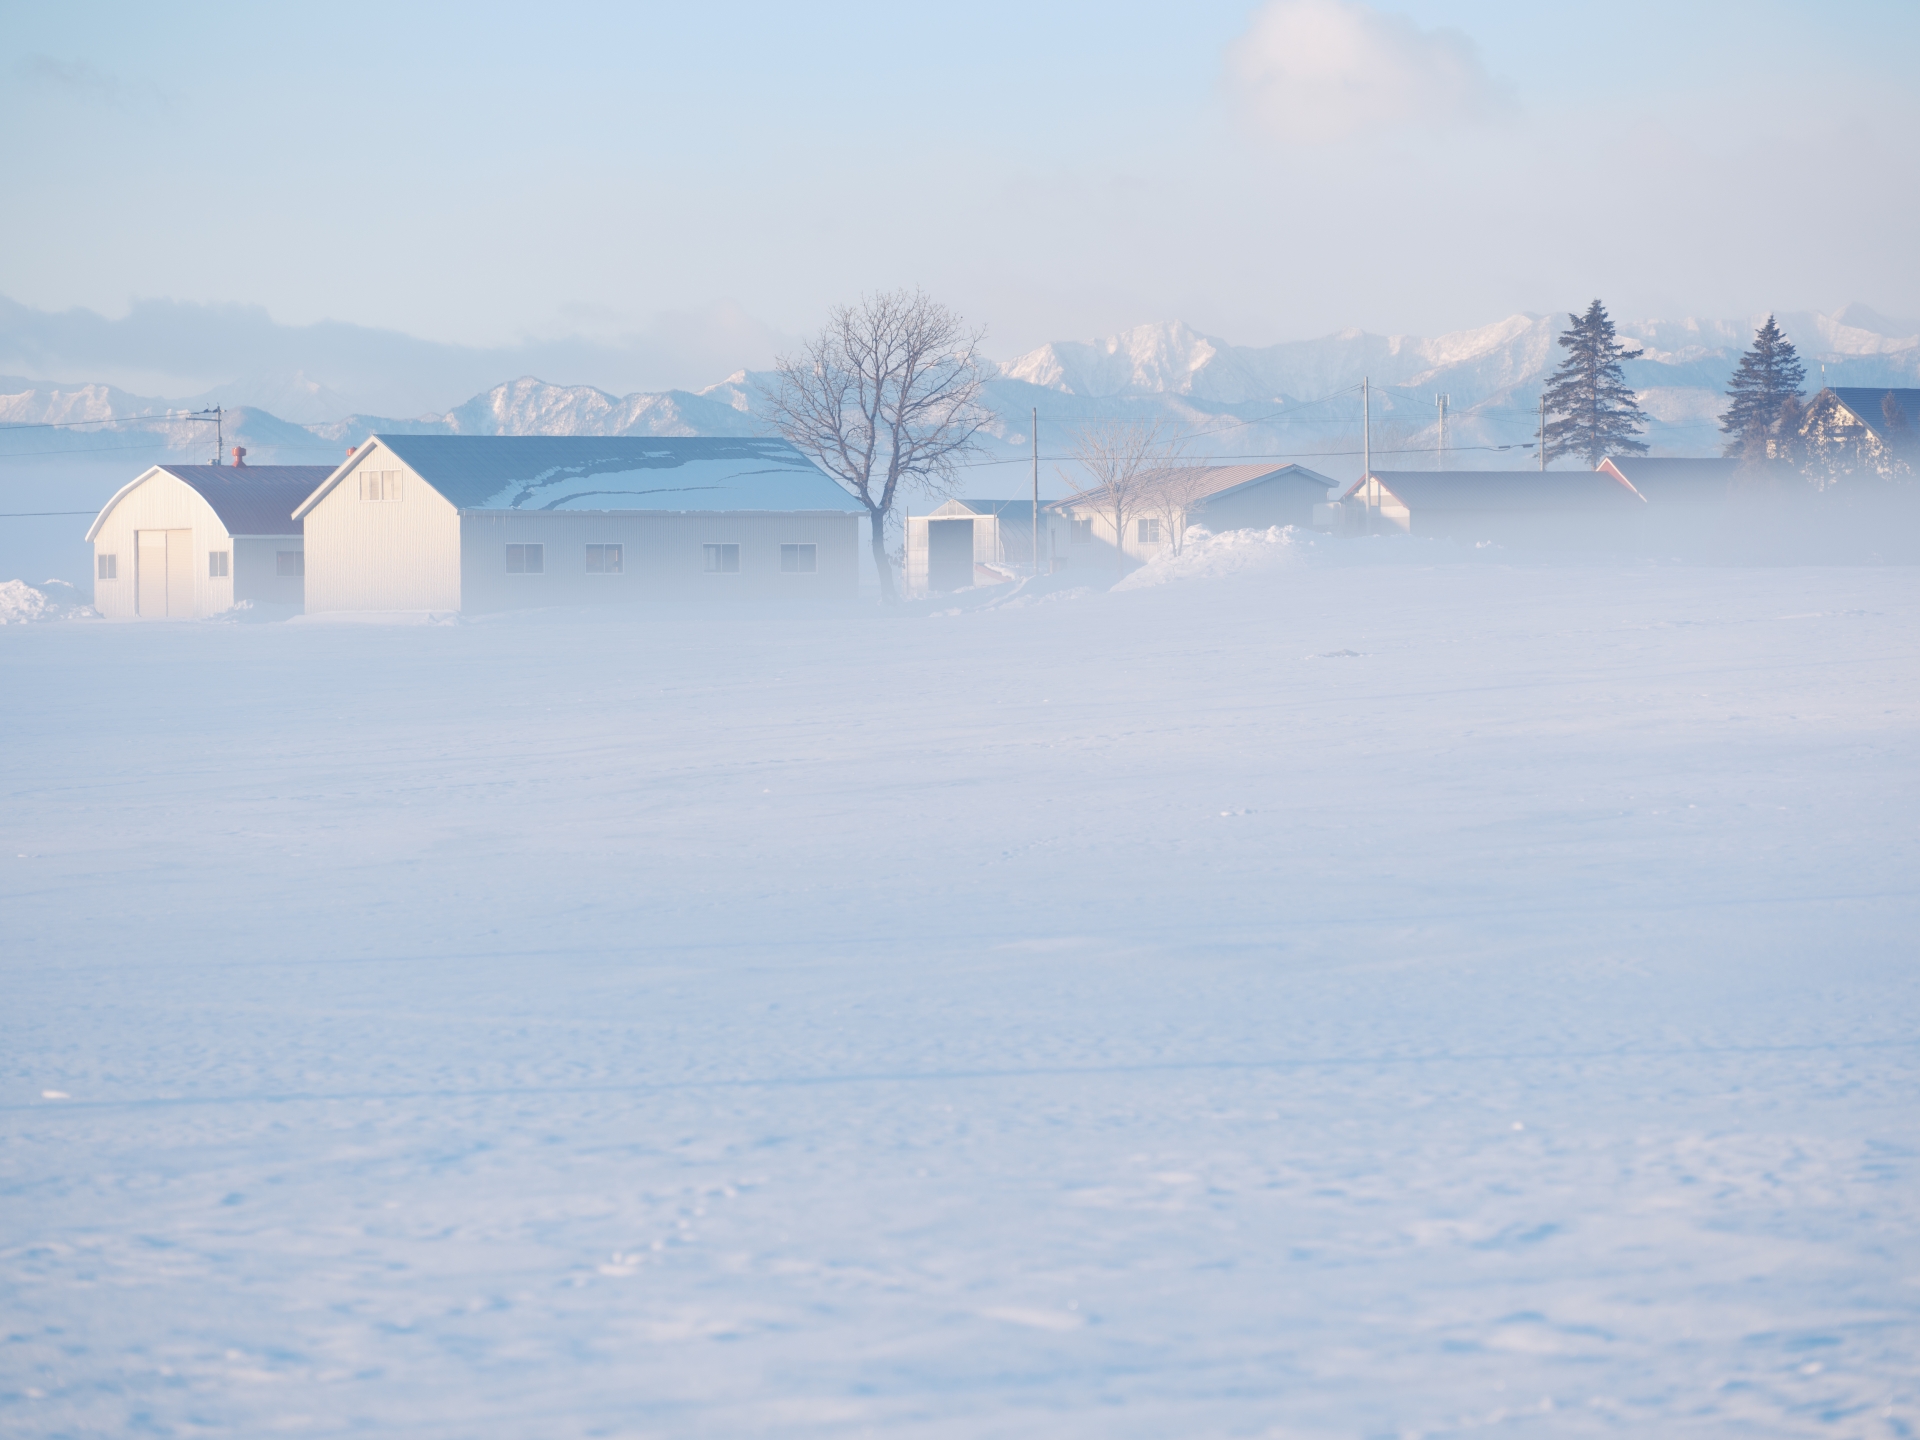 Some buildings in the middle of a snow field, which is rearely seen by snow storm